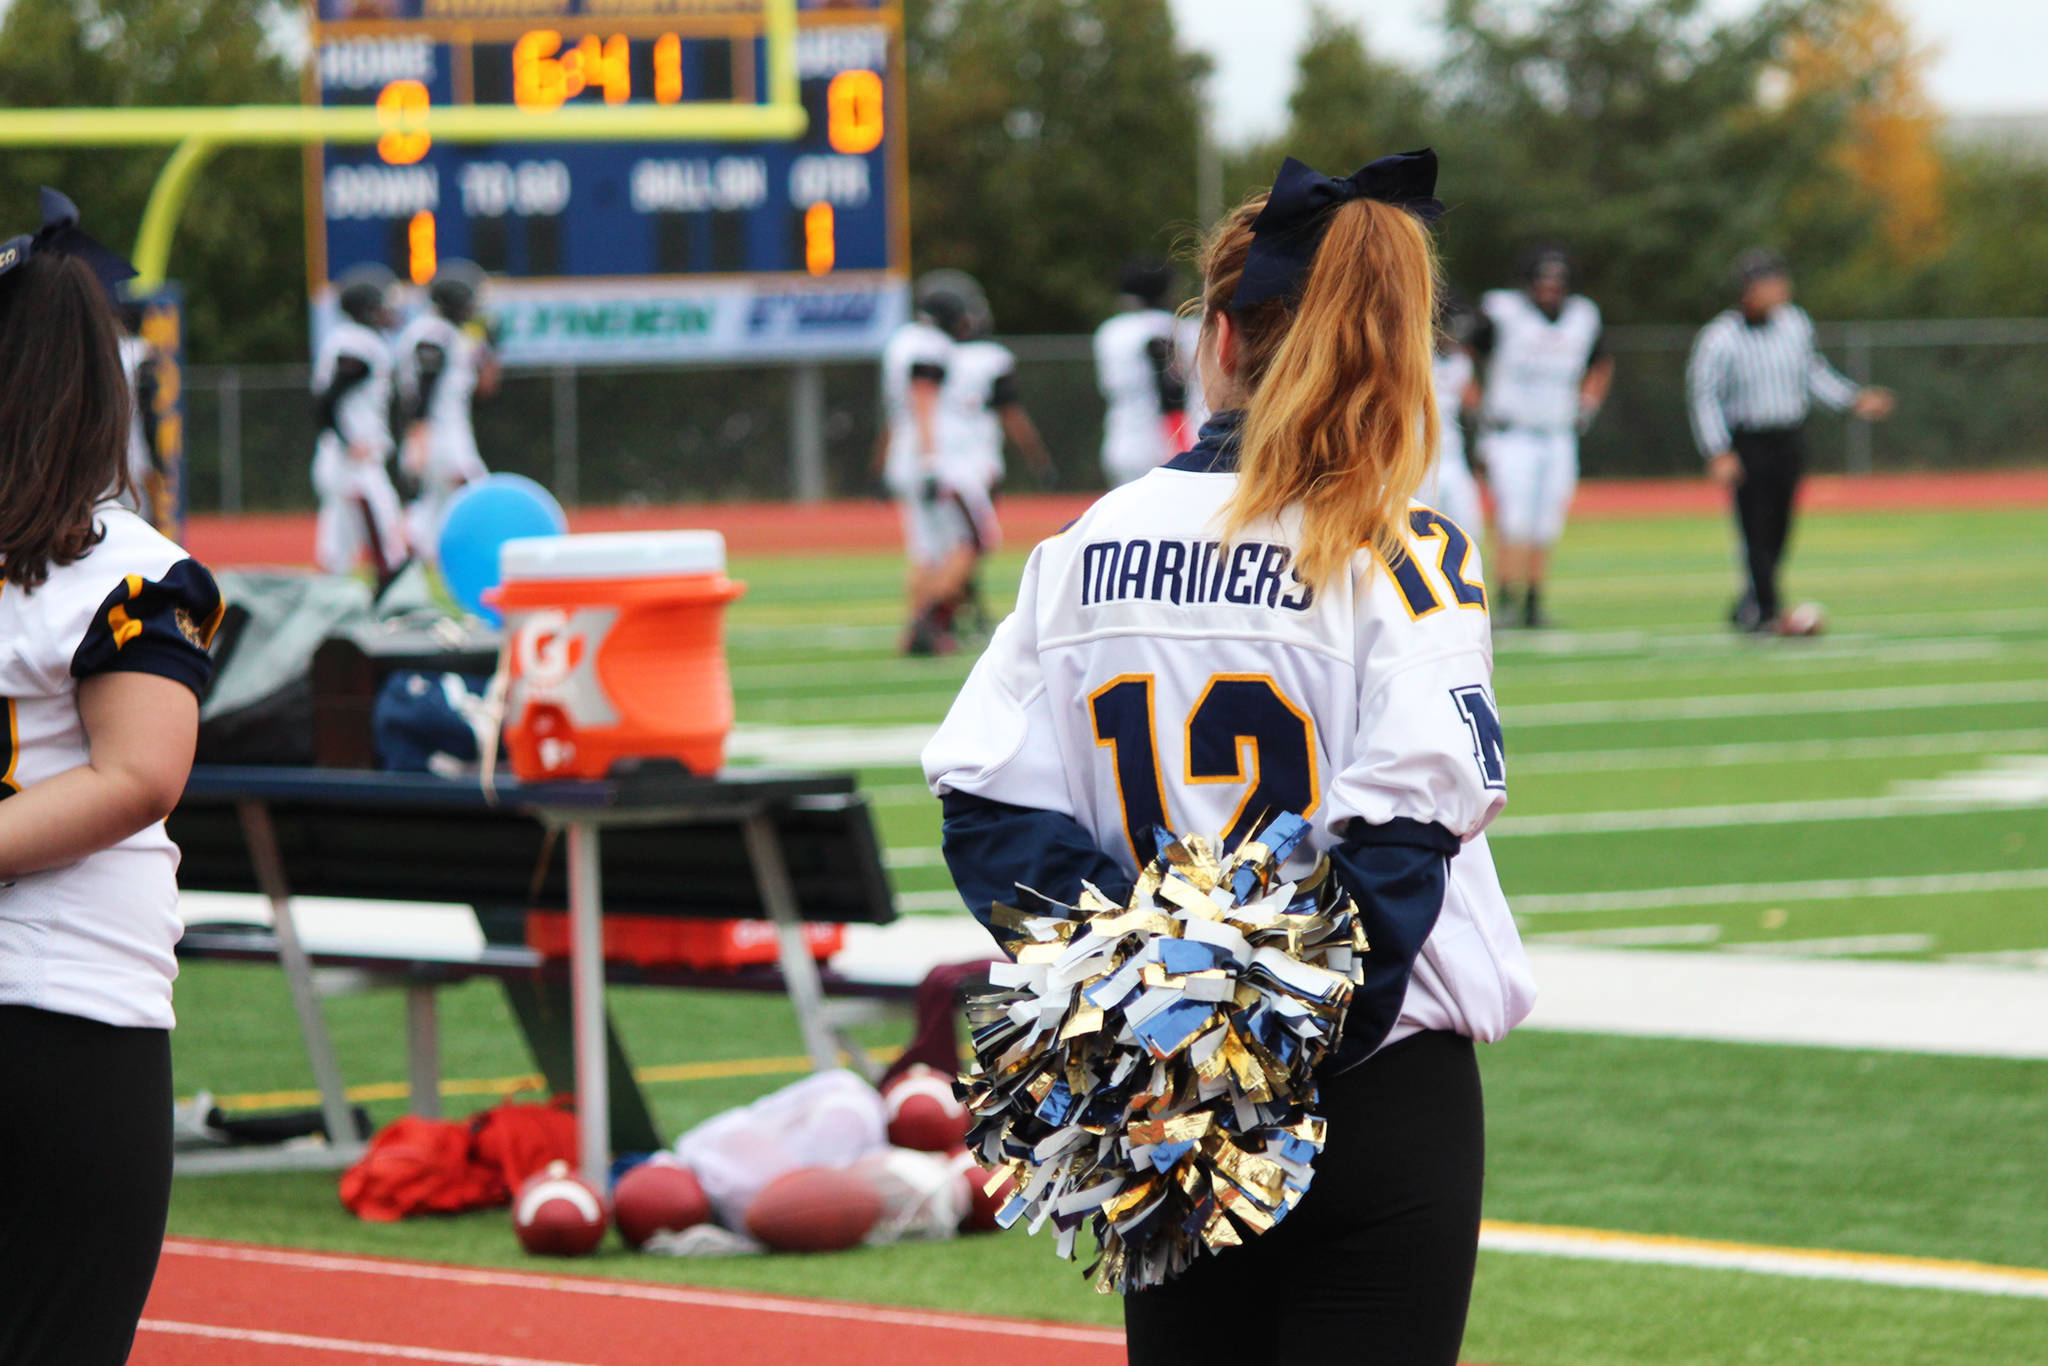 A Homer High School cheerleader watches the Mariners’ game against Ben Eielson High School on Saturday, Oct. 7, 2017 in Homer, Alaska. The Mariners defeated the Ravens 33-21, and will head to the ASAA First National Bowl Series Division III Championship. (Photo by Megan Pacer/Homer News)